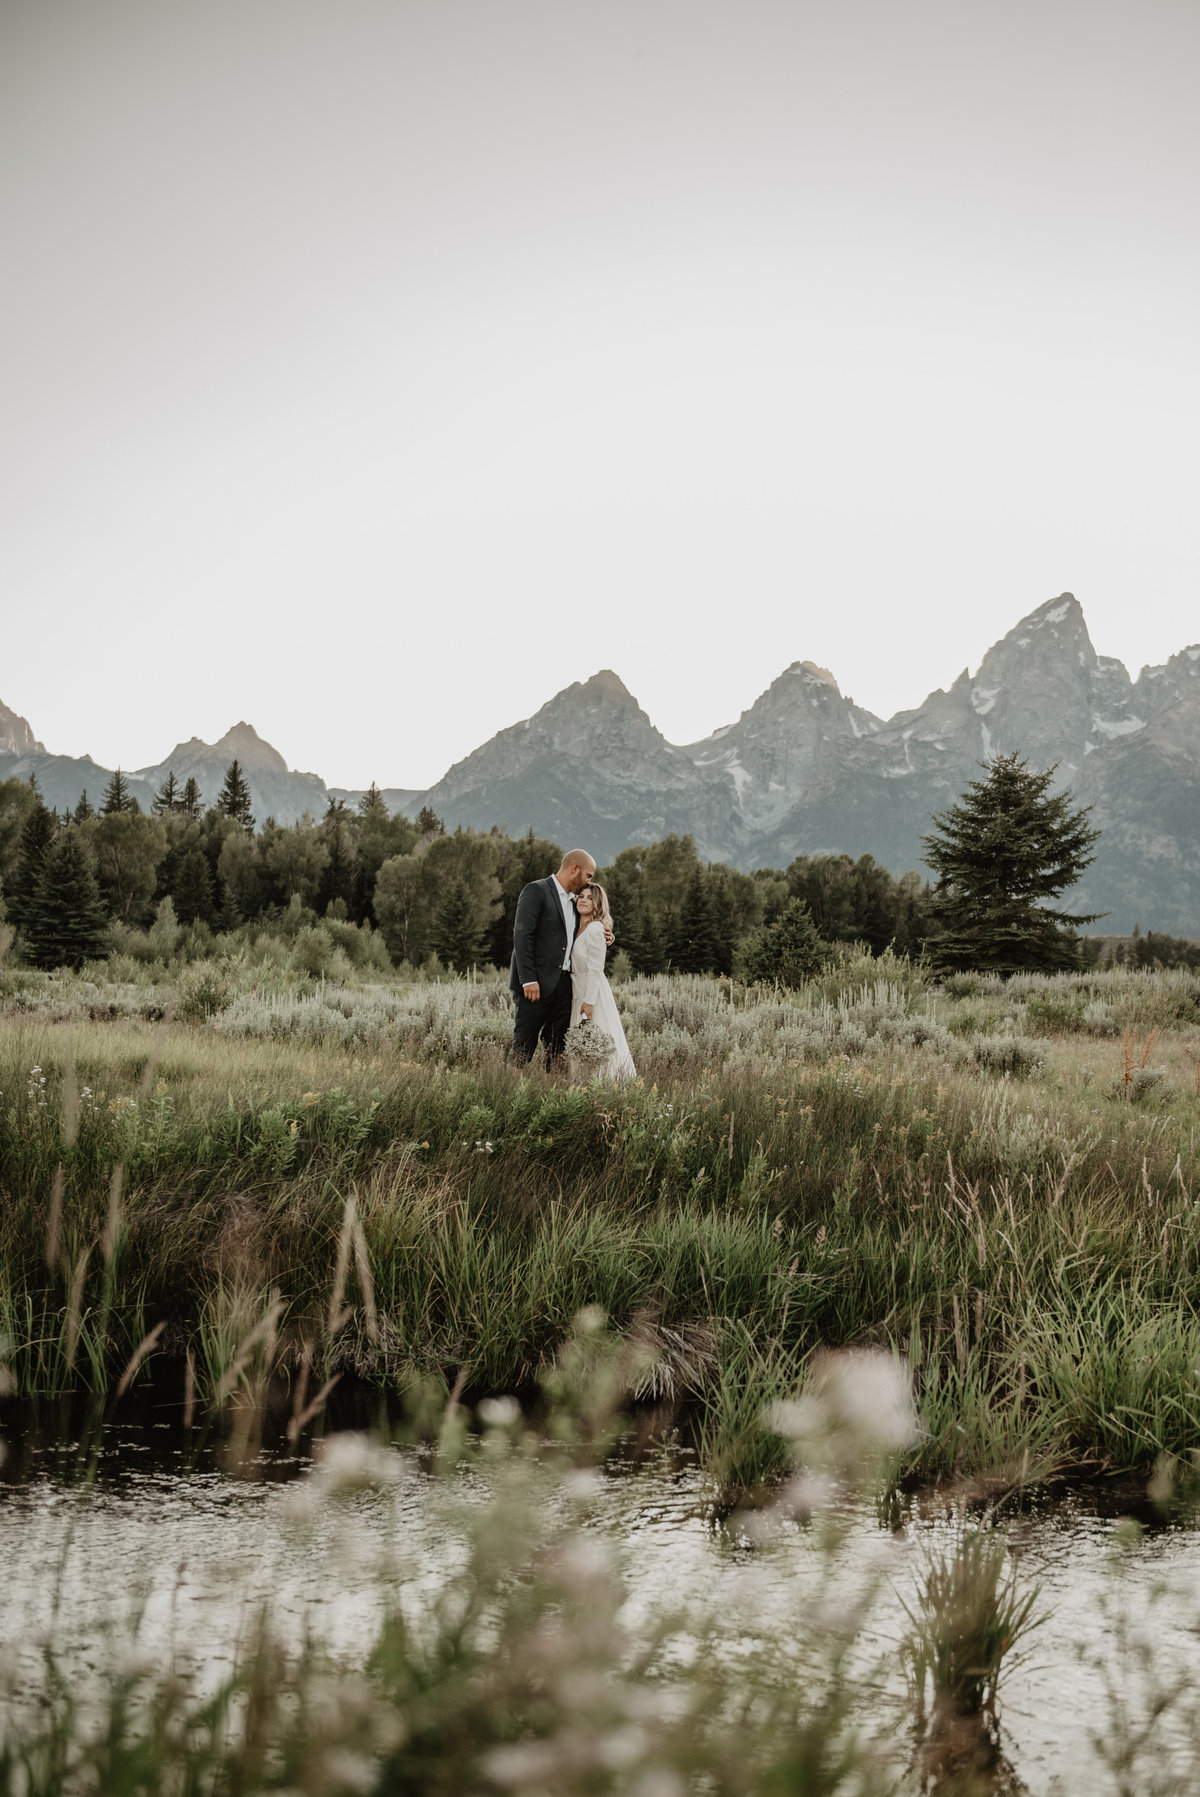 Teton elopement with bride and groom in a field holding each other with the mountains in the background and a creek in the foreground